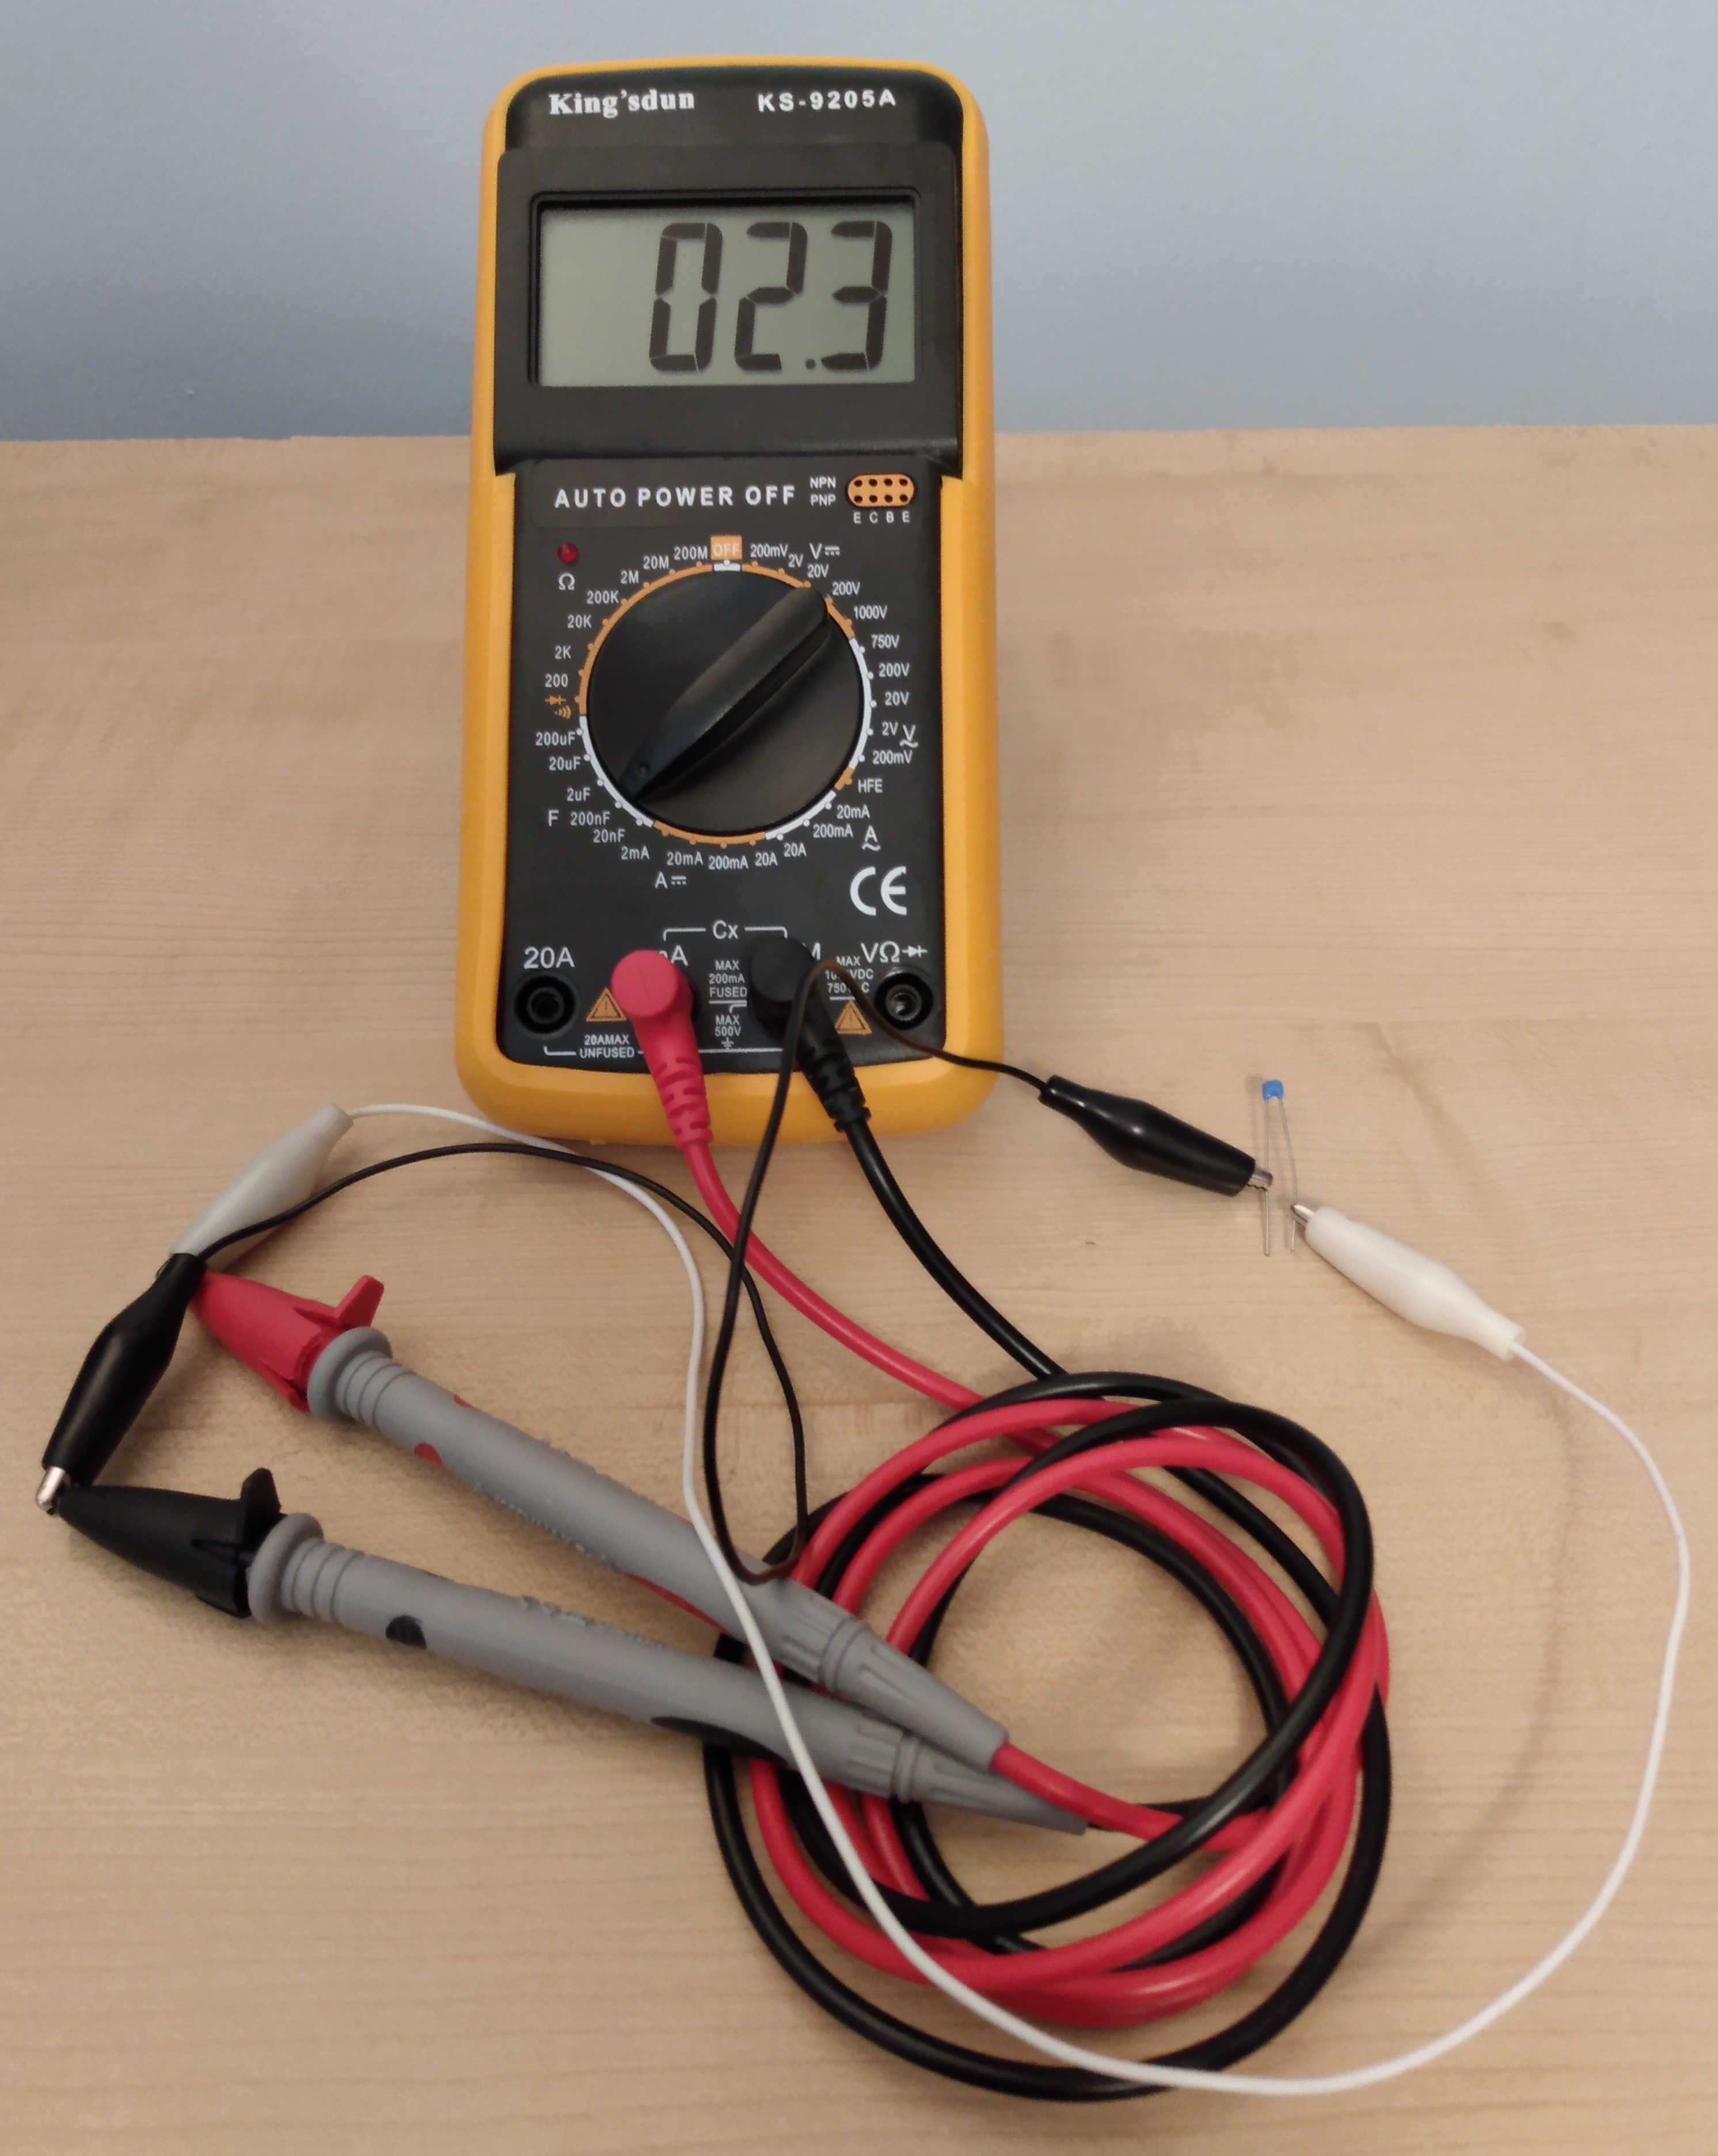 Measuring a 2.2nF capacitor